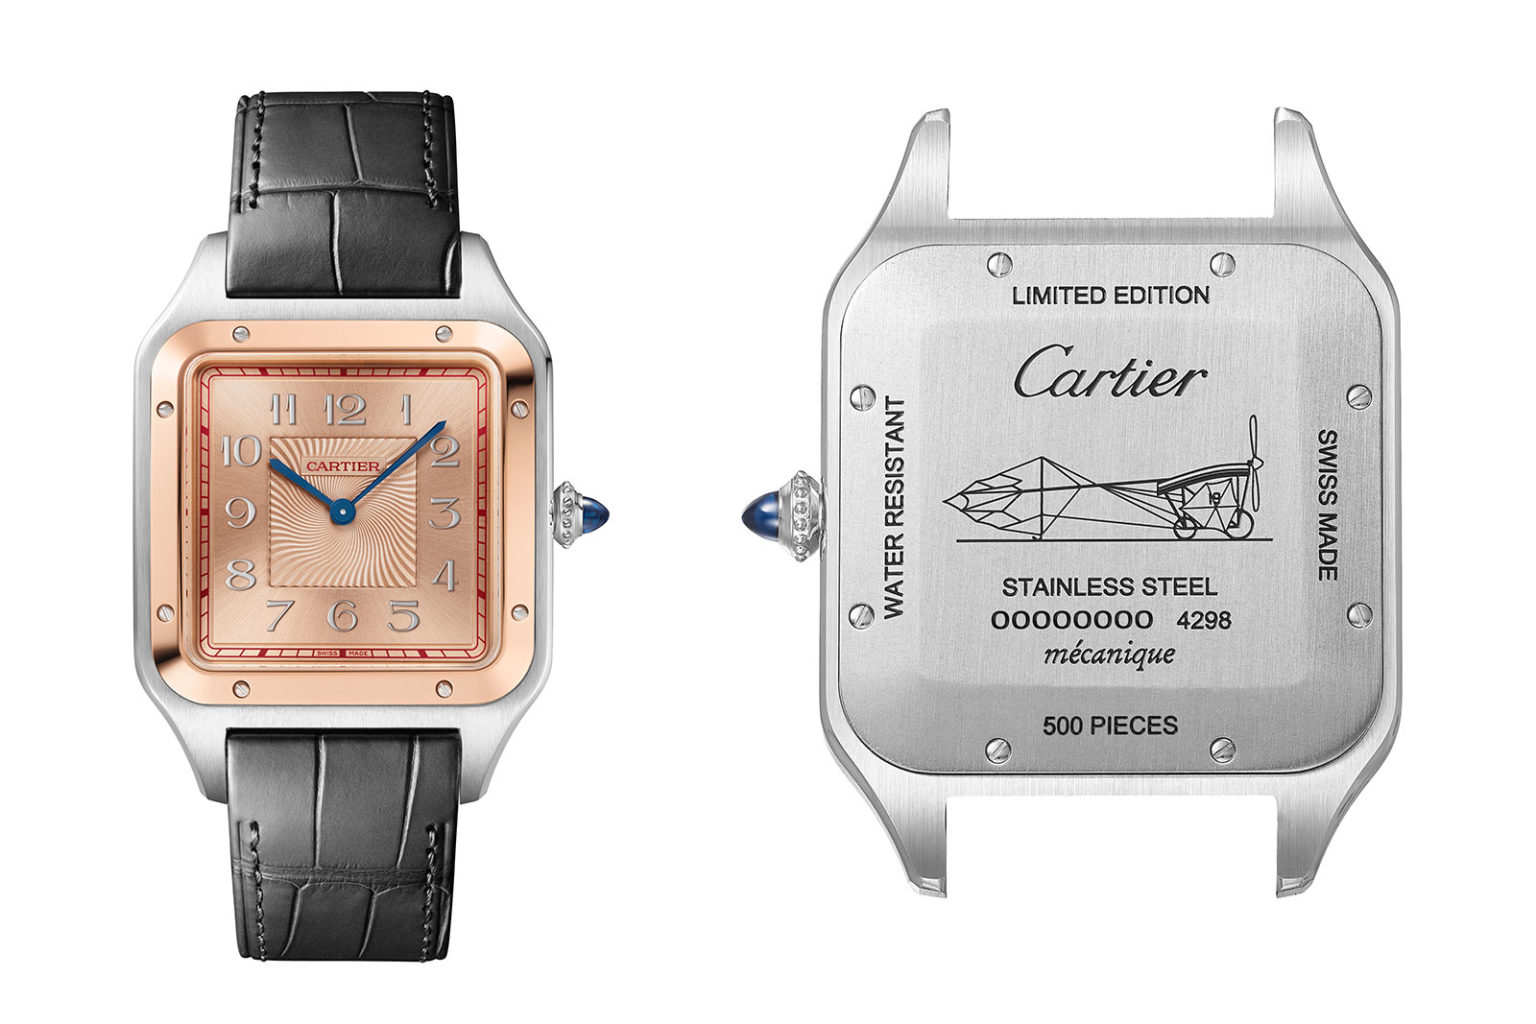 Cartier Introduces the Santos-Dumont Extra-Large Limited Editions | SJX ...